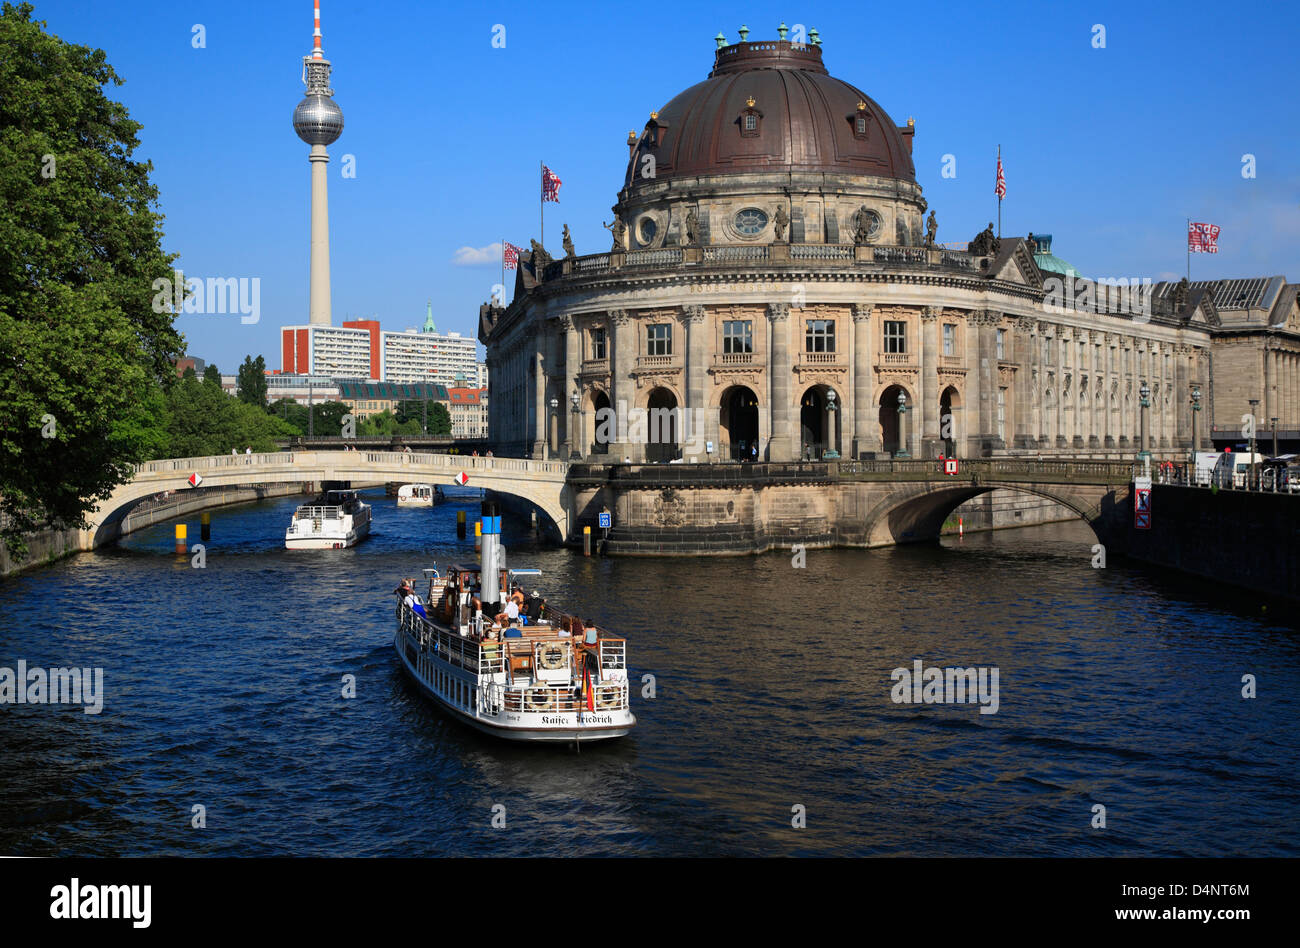 Bodemuseum at museums island at spree river, Berlin, Germany Stock Photo